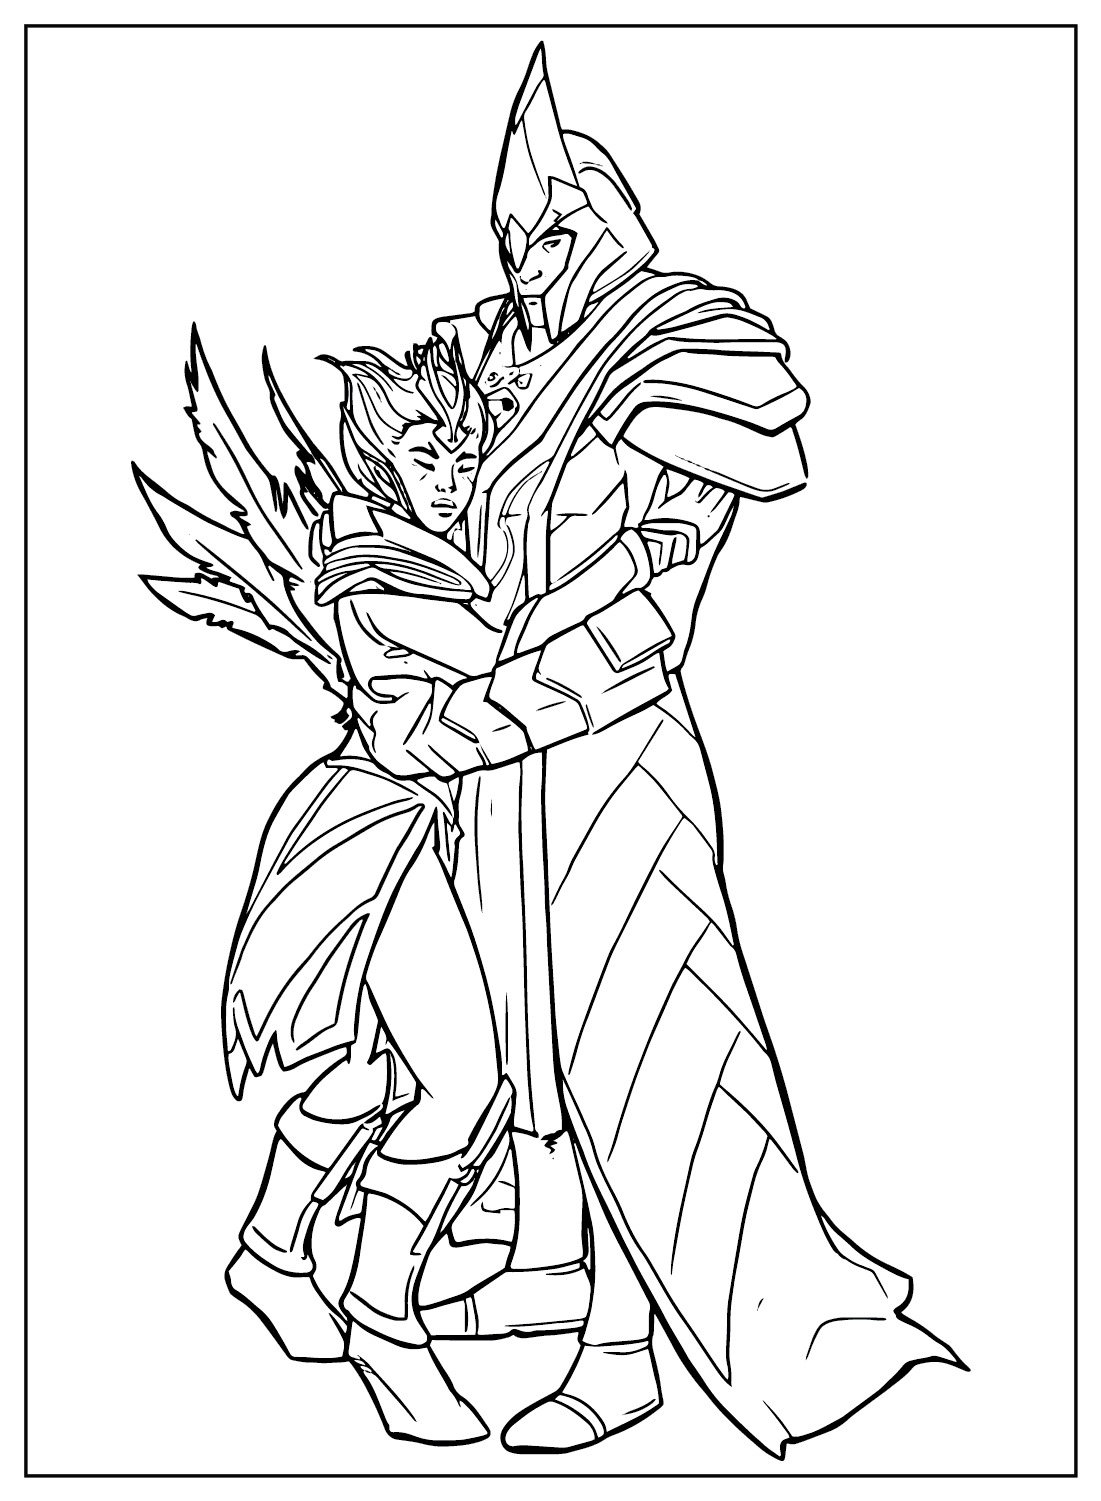 Dota 2 Coloring Page from Dota 2